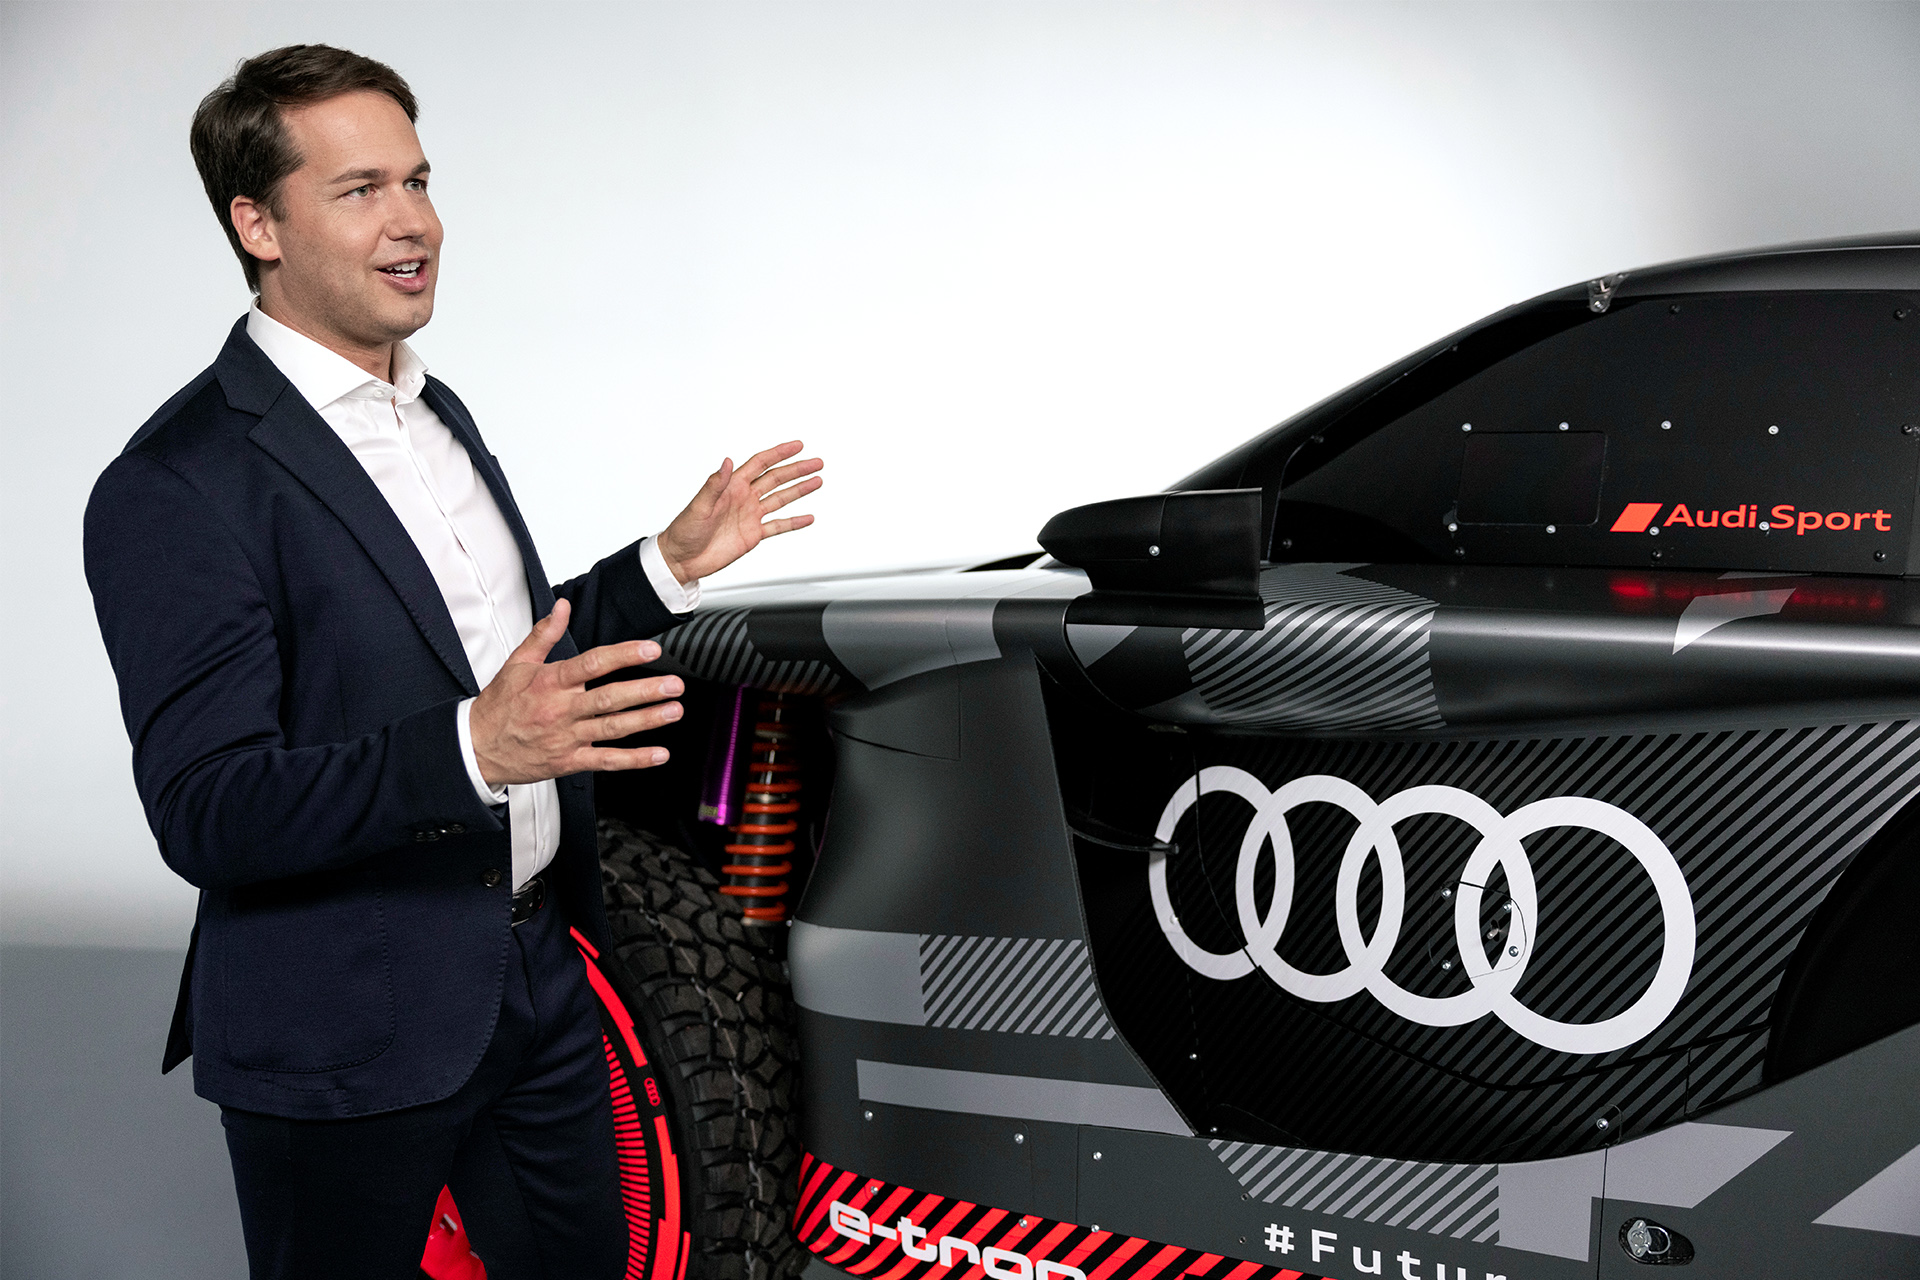 Julius Seebach standing next to the Audi RS Q e-tron, gesticulating with his hands.